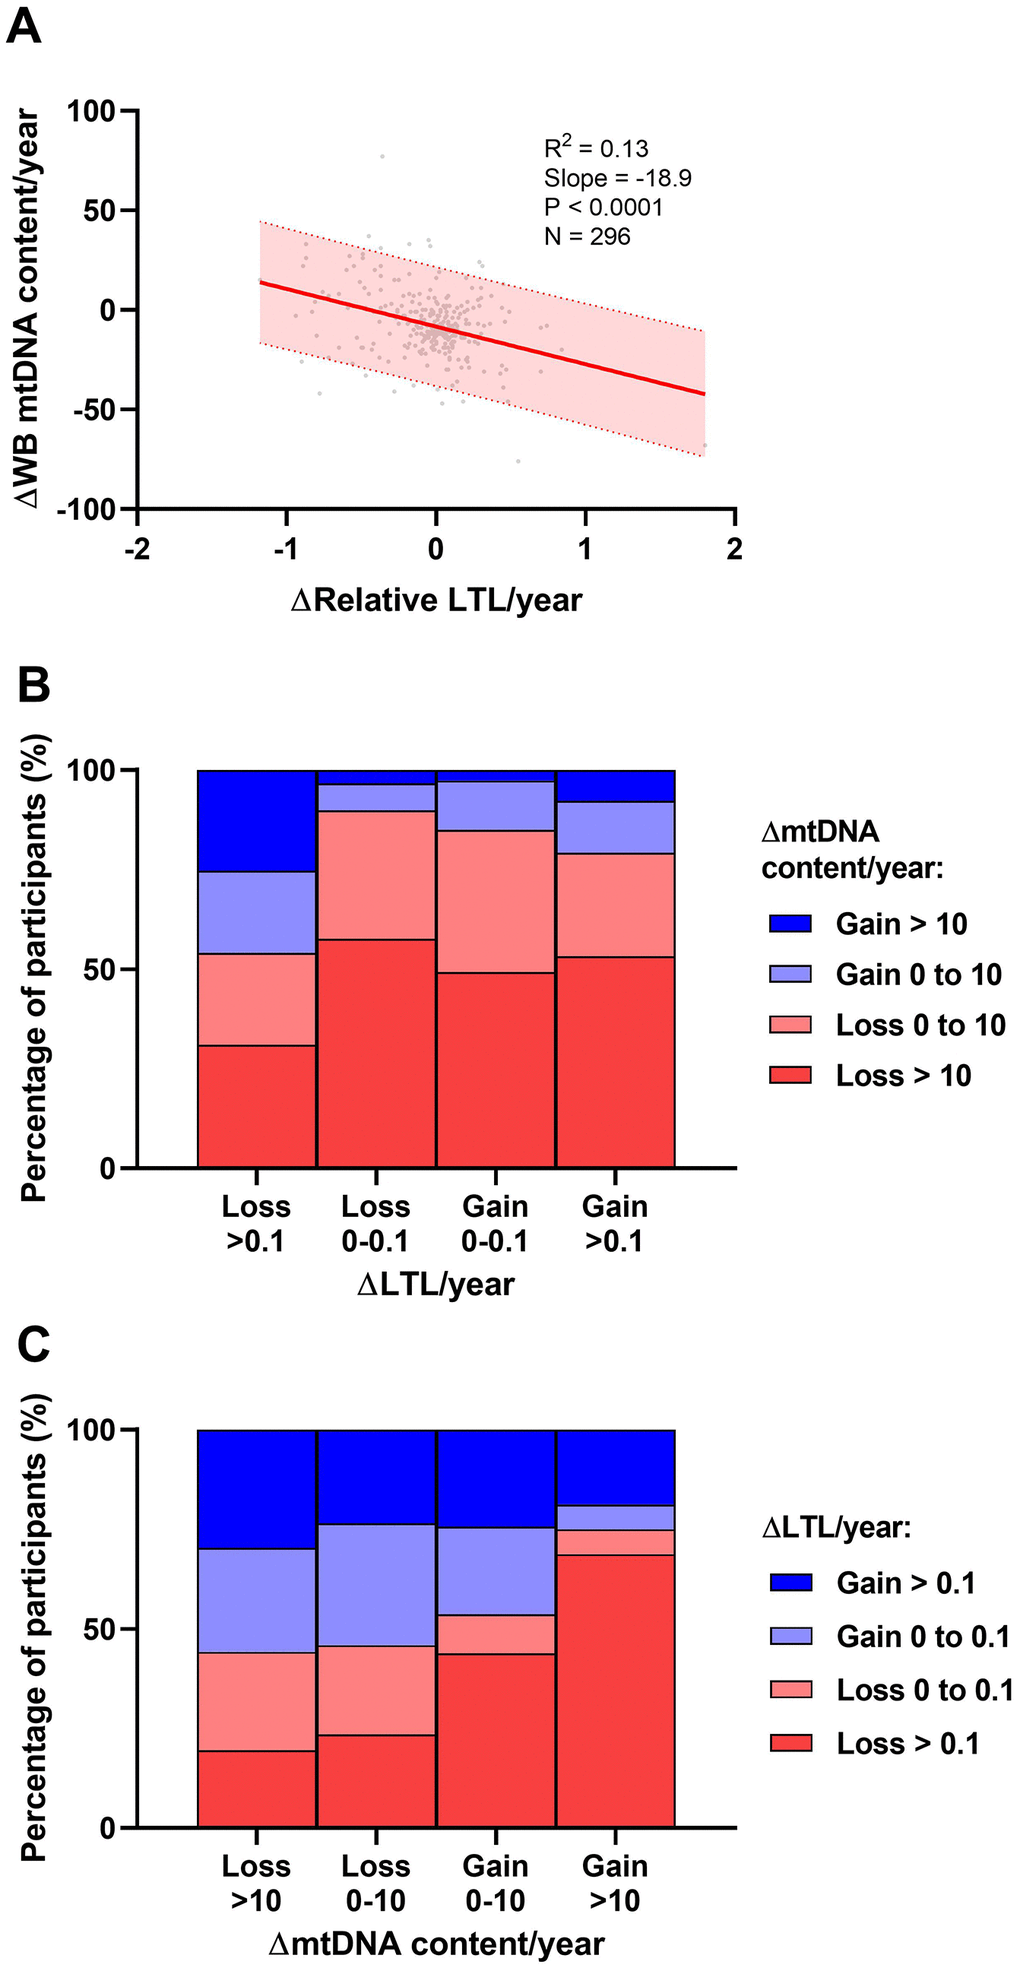 Univariate associations between longitudinal rates of change in leukocyte telomere length (LTL) and whole blood mitochondrial DNA (WB mtDNA) content. (A) Data show an inverse relationship between ΔLTL/year and WB ΔmtDNA content/year. Shaded area represents the 95% prediction interval. Coefficient of determination (R2) and Pearson's P-value shown. (B) Participants were categorized based on a small (0.1) loss or gain of ΔLTL/year and further stratified according to a small (10) loss or gain of WB ΔmtDNA content/year. These data show that participants who lost LTL fastest were more likely to preserve or gain WB mtDNA content. (C) Similarly, participants were categorized based on WB ΔmtDNA content/year and stratified according to ΔLTL/year. The data show that participants who lost WB mtDNA fastest were more likely to preserve LTL and vice versa.